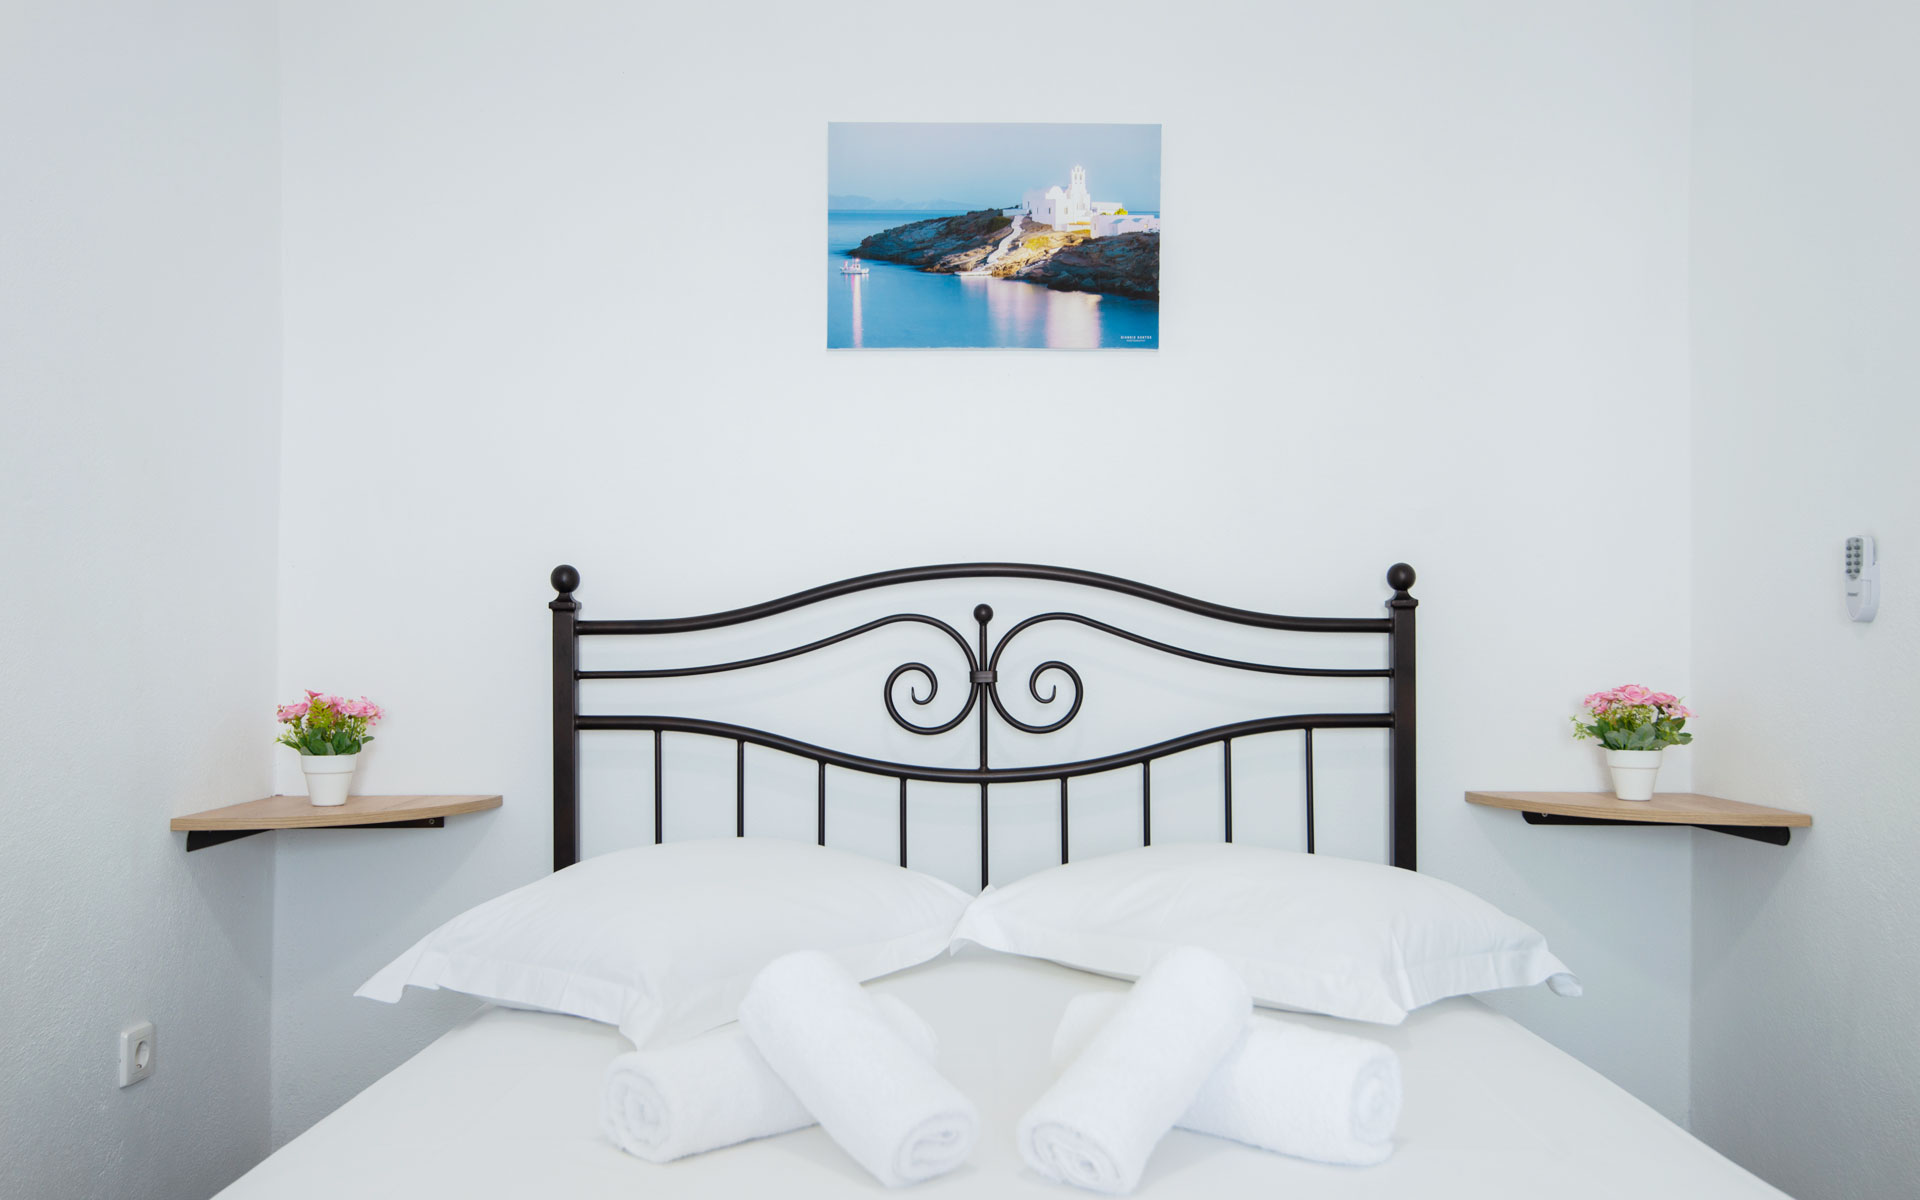 Double room in Roubina accommodation in Sifnos